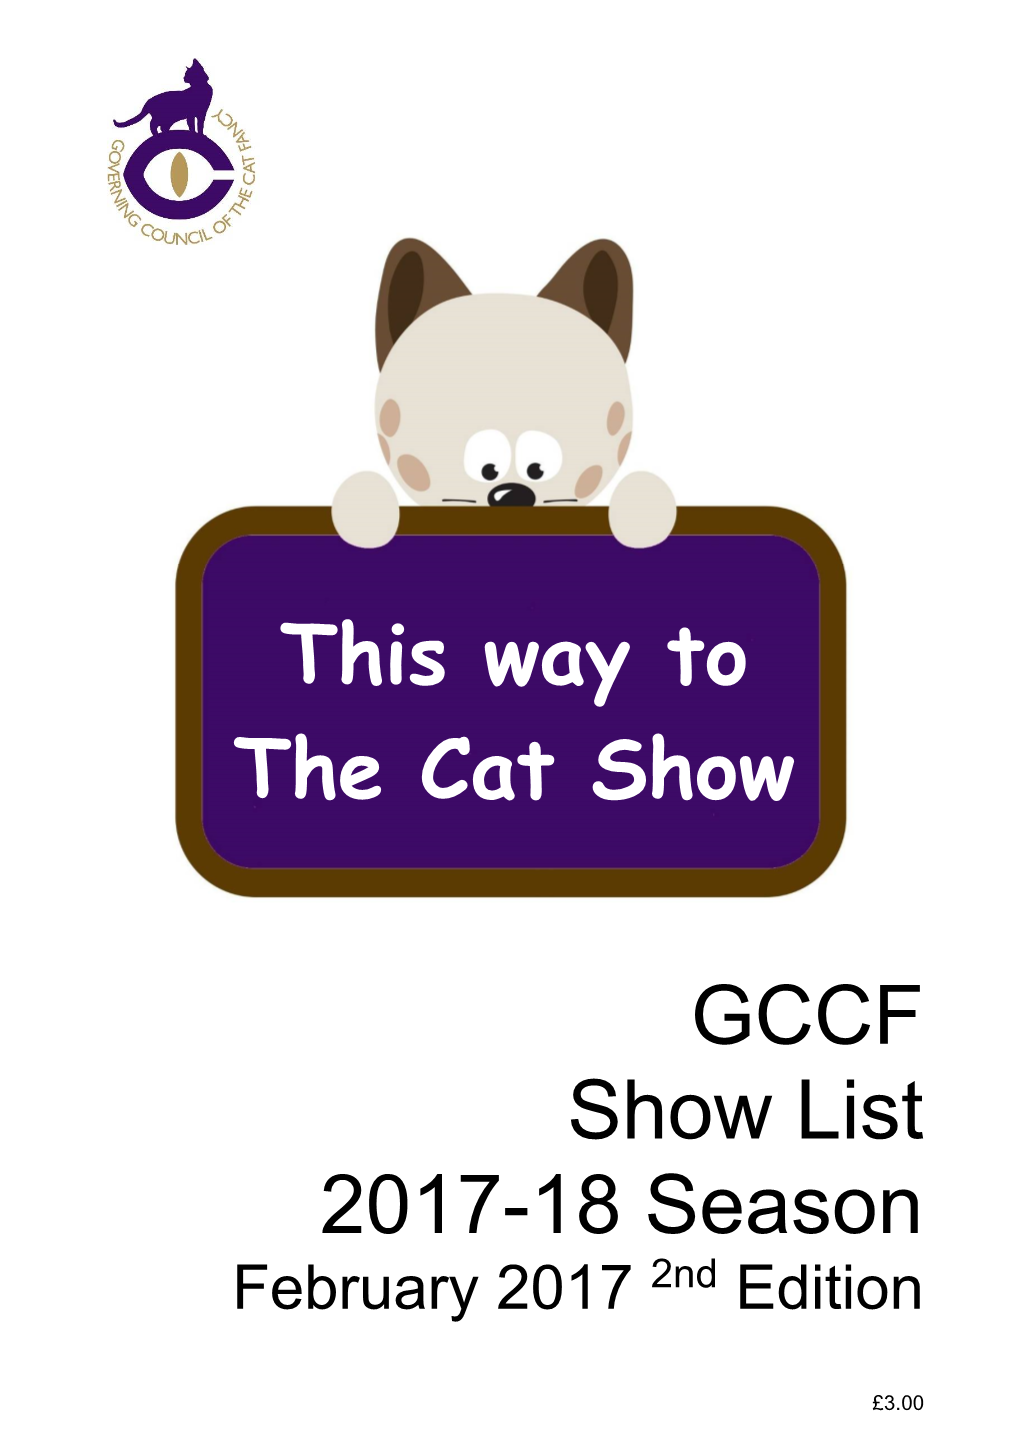 GCCF Show List 2017-18 Season This Way to the Cat Show